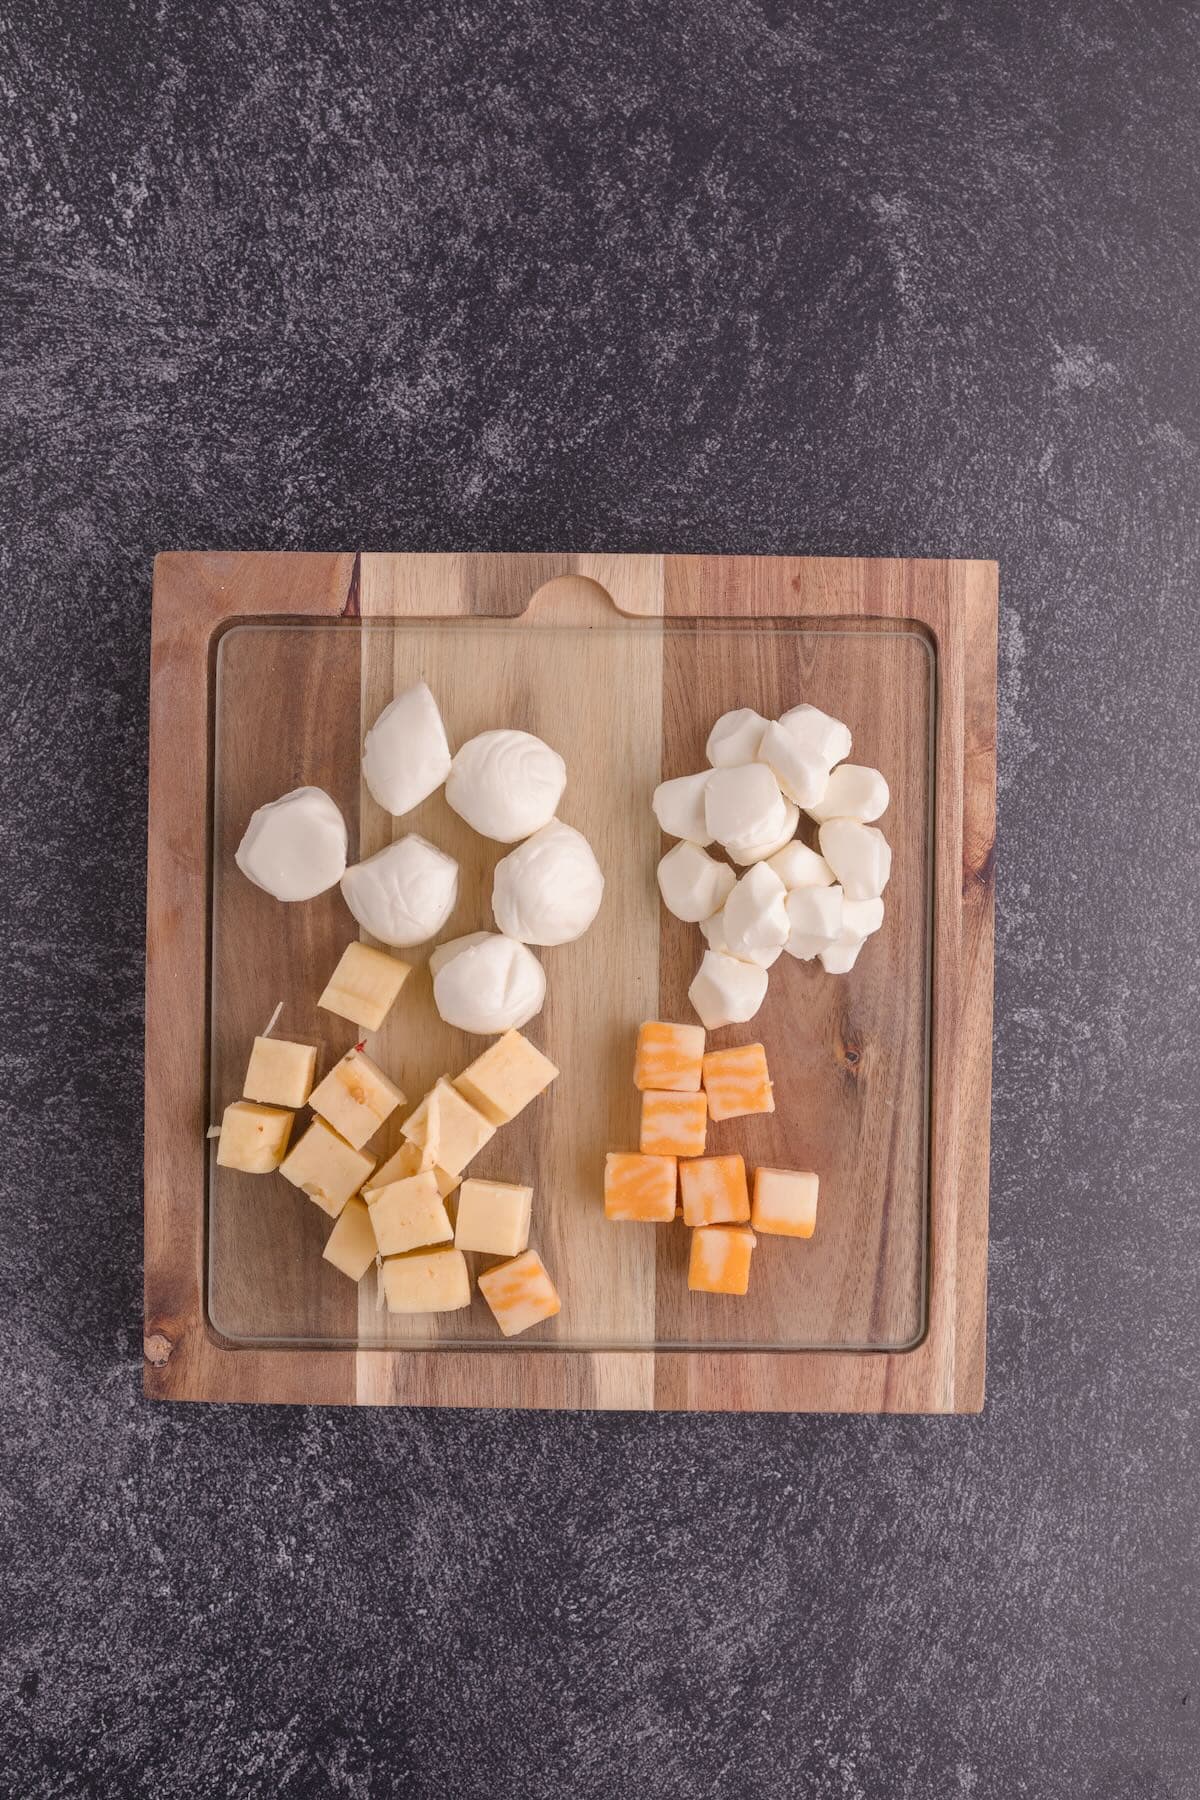 A small wooden cutting board with mozzarella balls and cubes of cheese. 